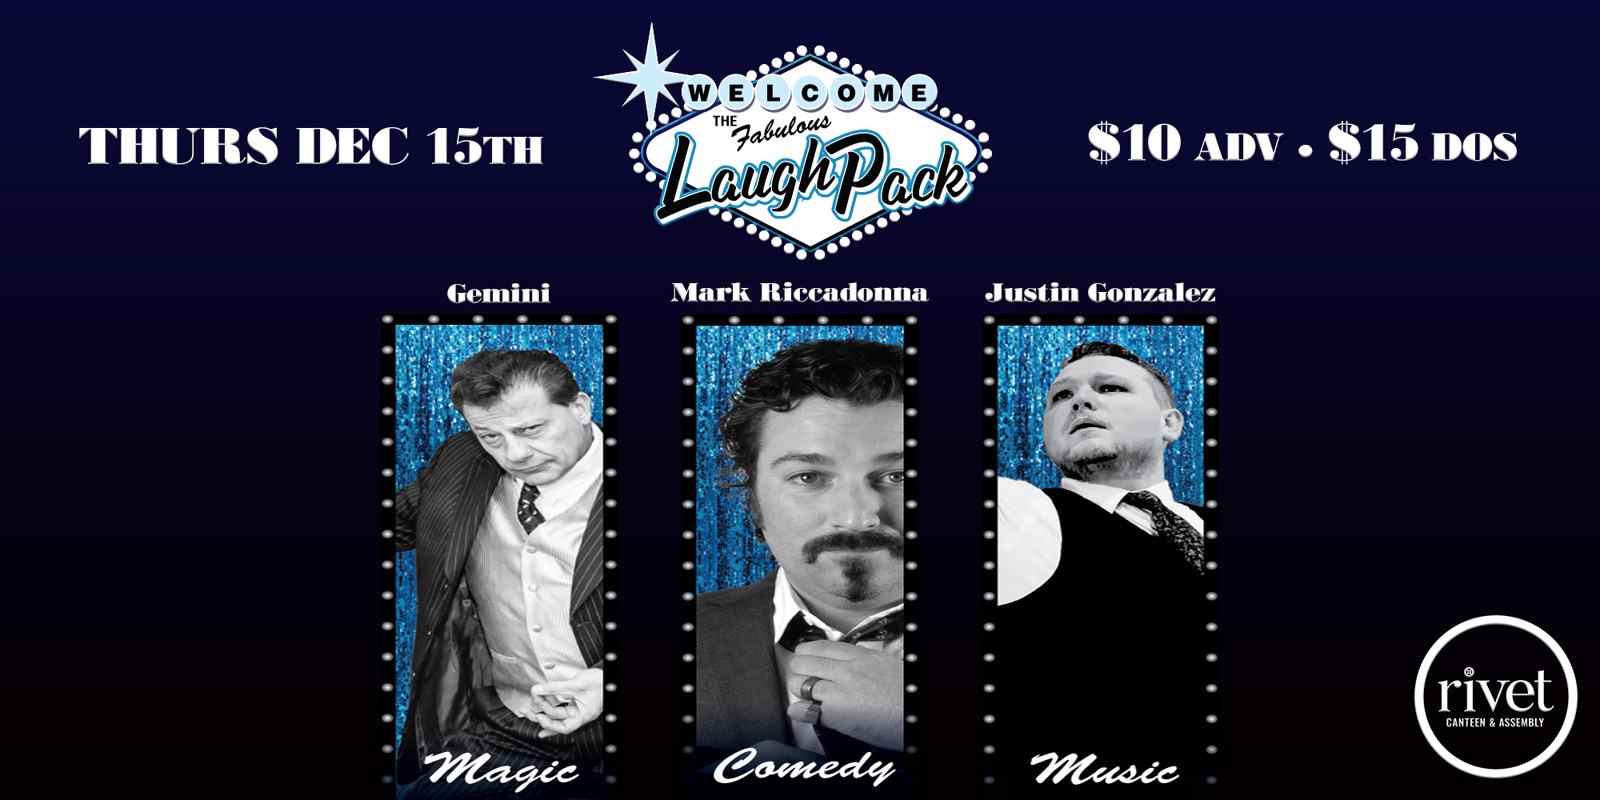 The Fabulous Laugh Pack with Gemini, Mark Riccadonna, and Justin Gonzalez live at Rivet: Canteen & Assembly on Thursday, December 15th, 2022!